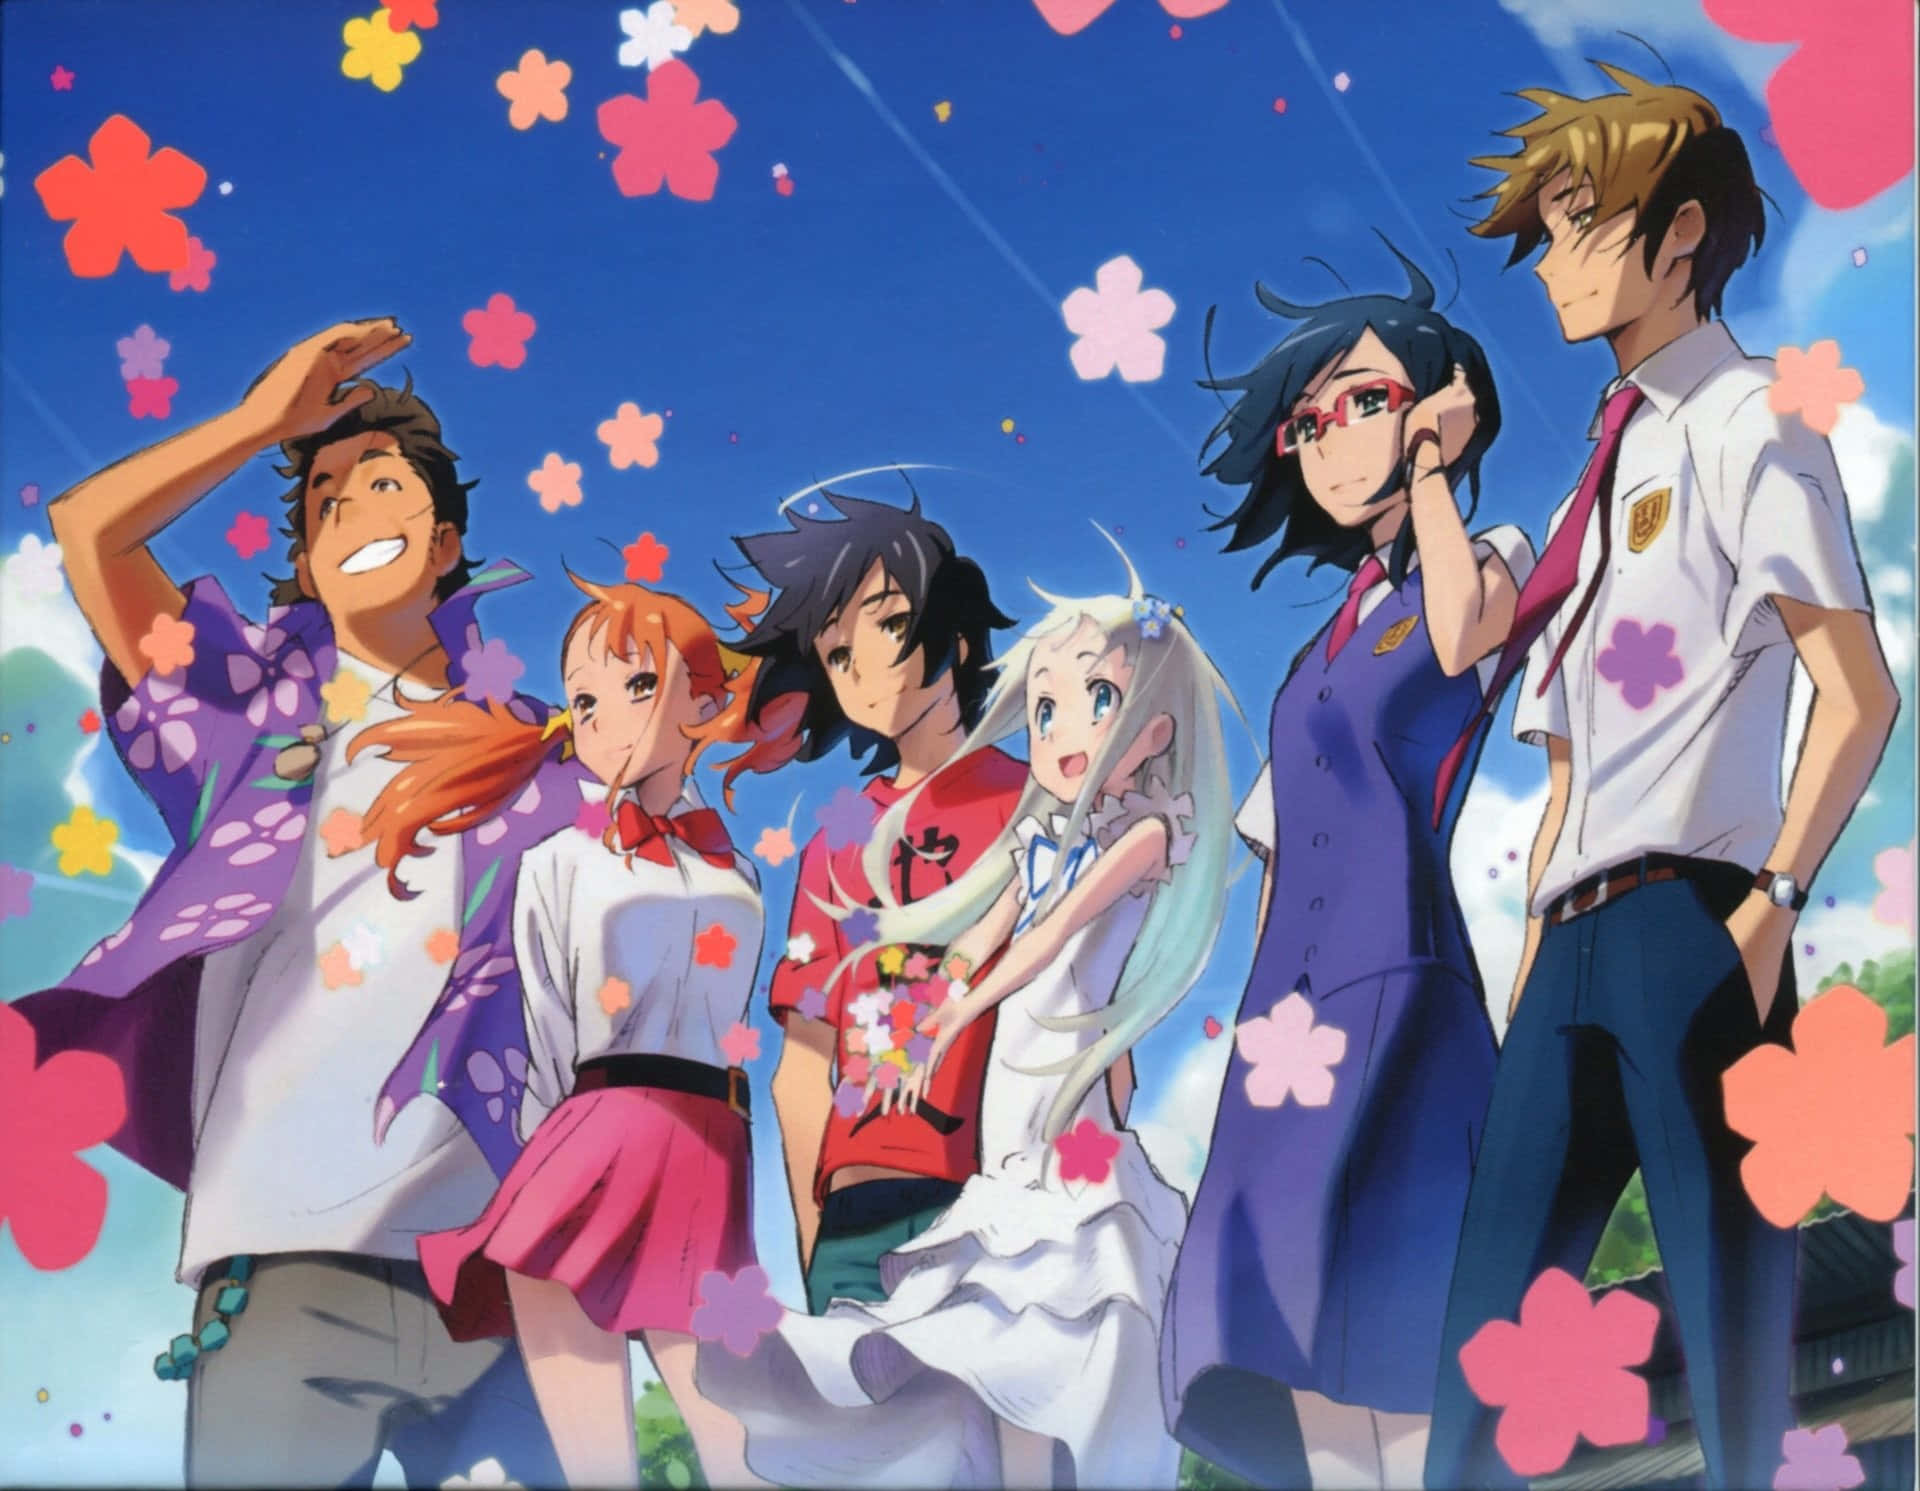 The Anohana cast shares a brilliant reminder of their friendship